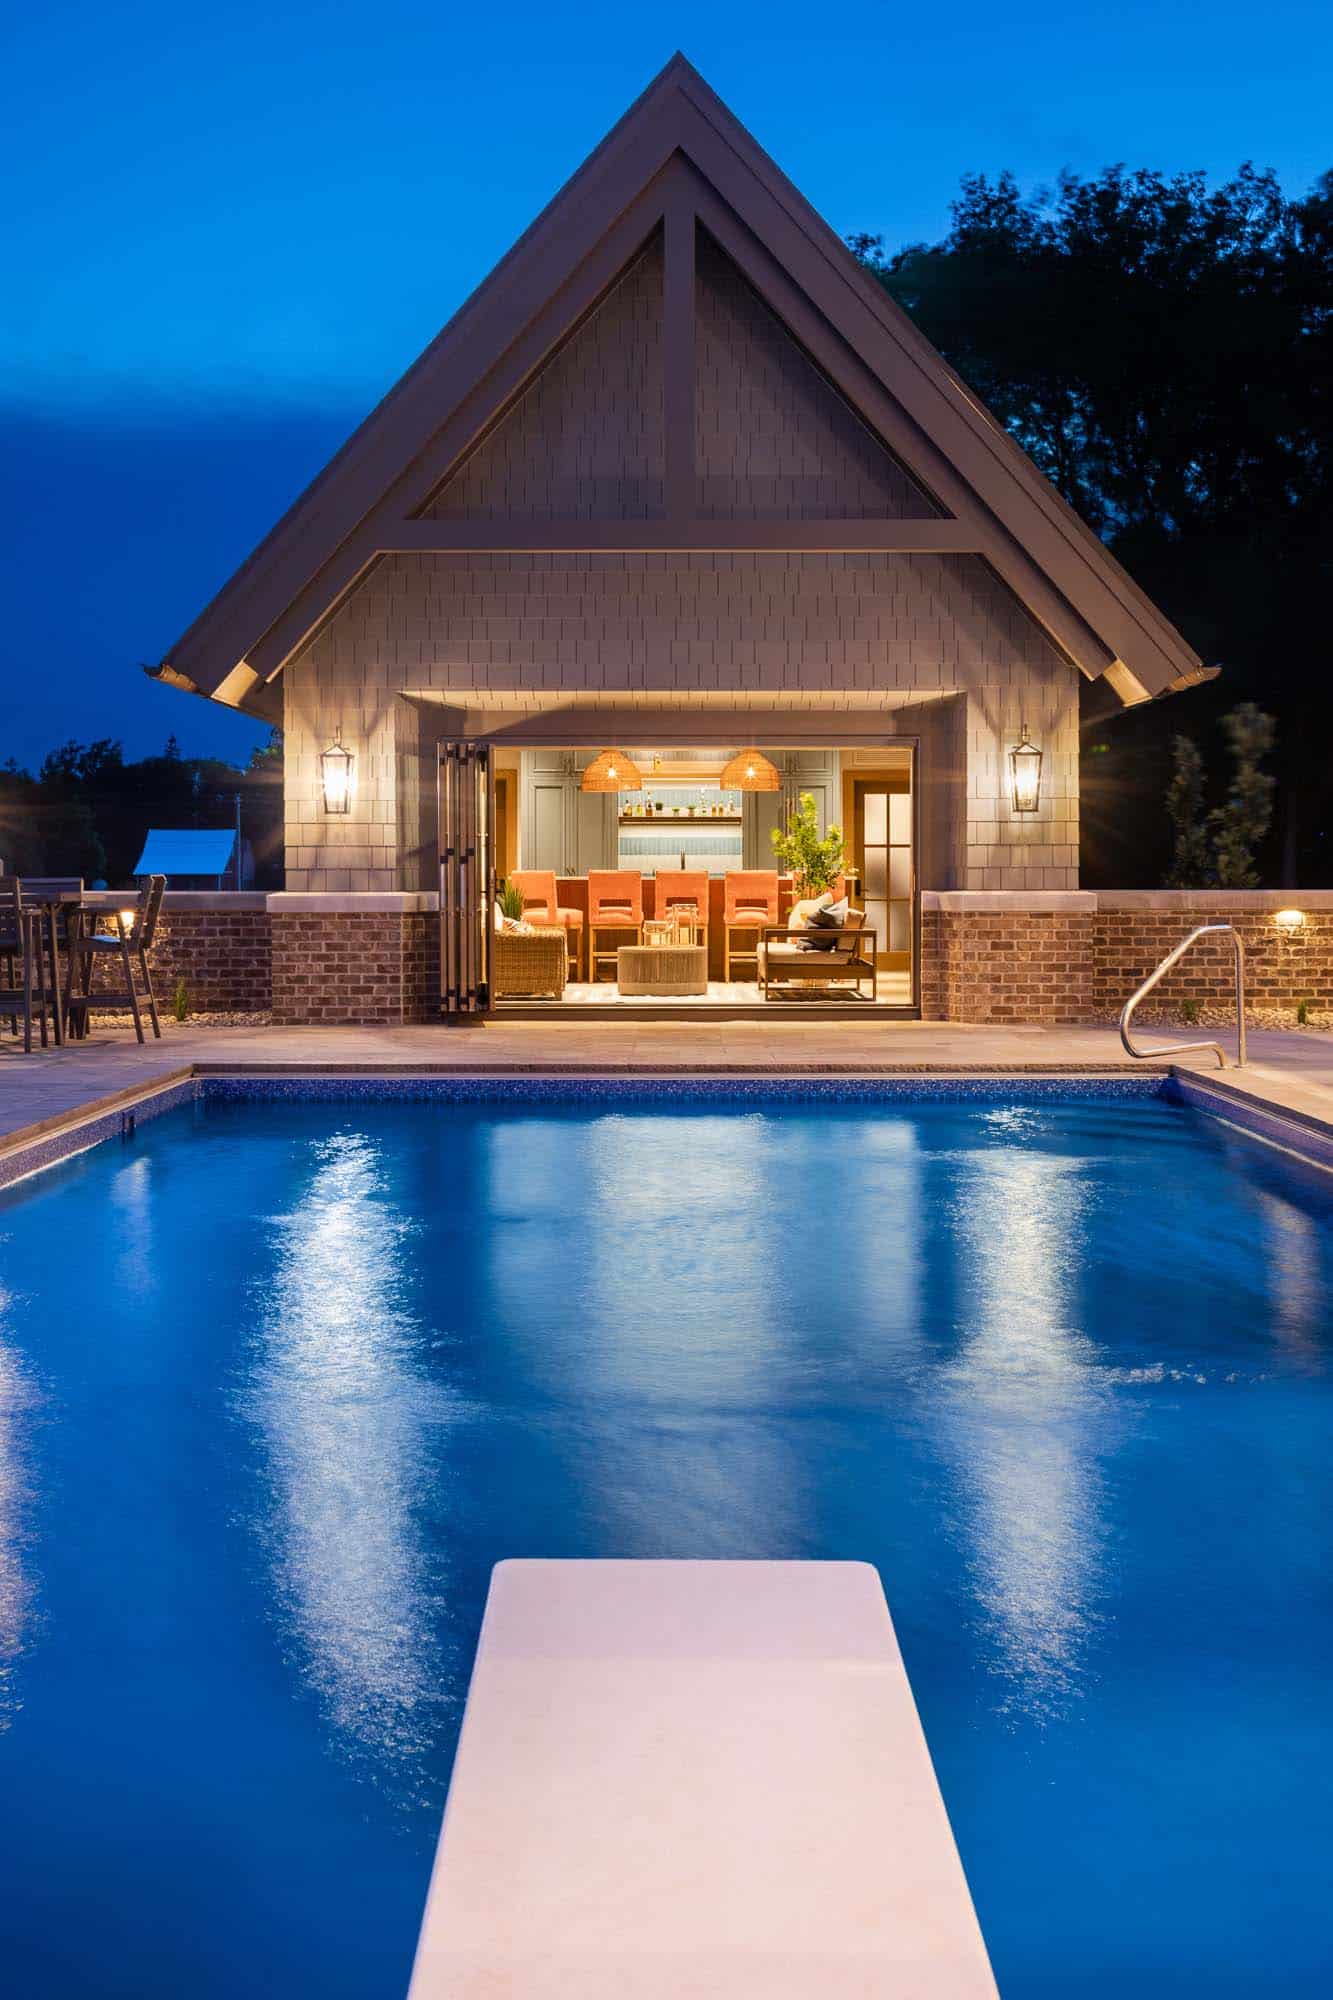 pool-house-and-swimming-pool-at-dusk